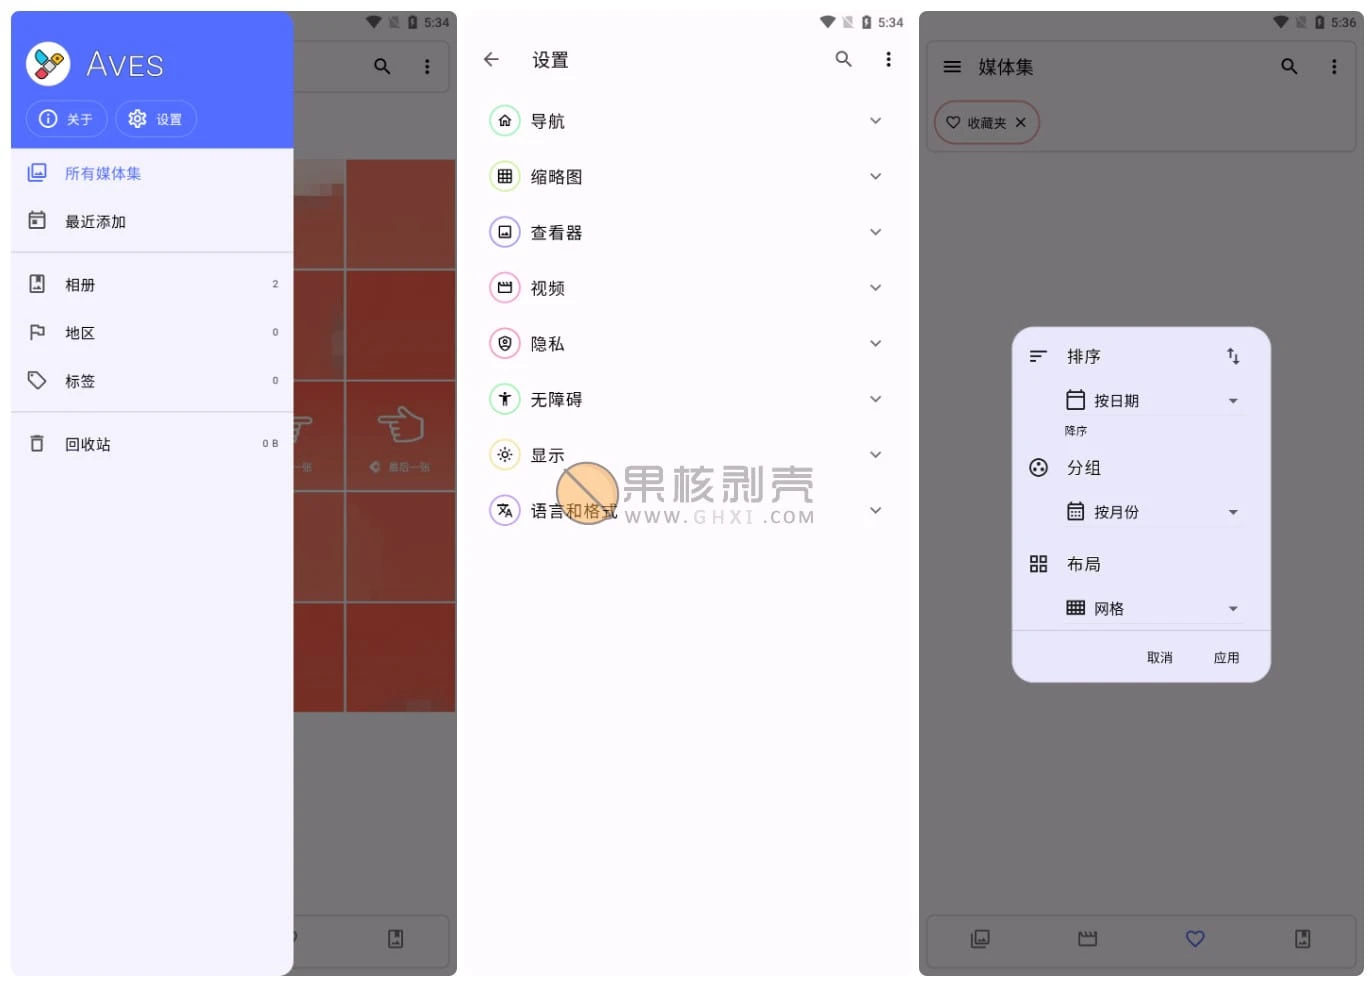 Android Aves(相册) v1.11.1